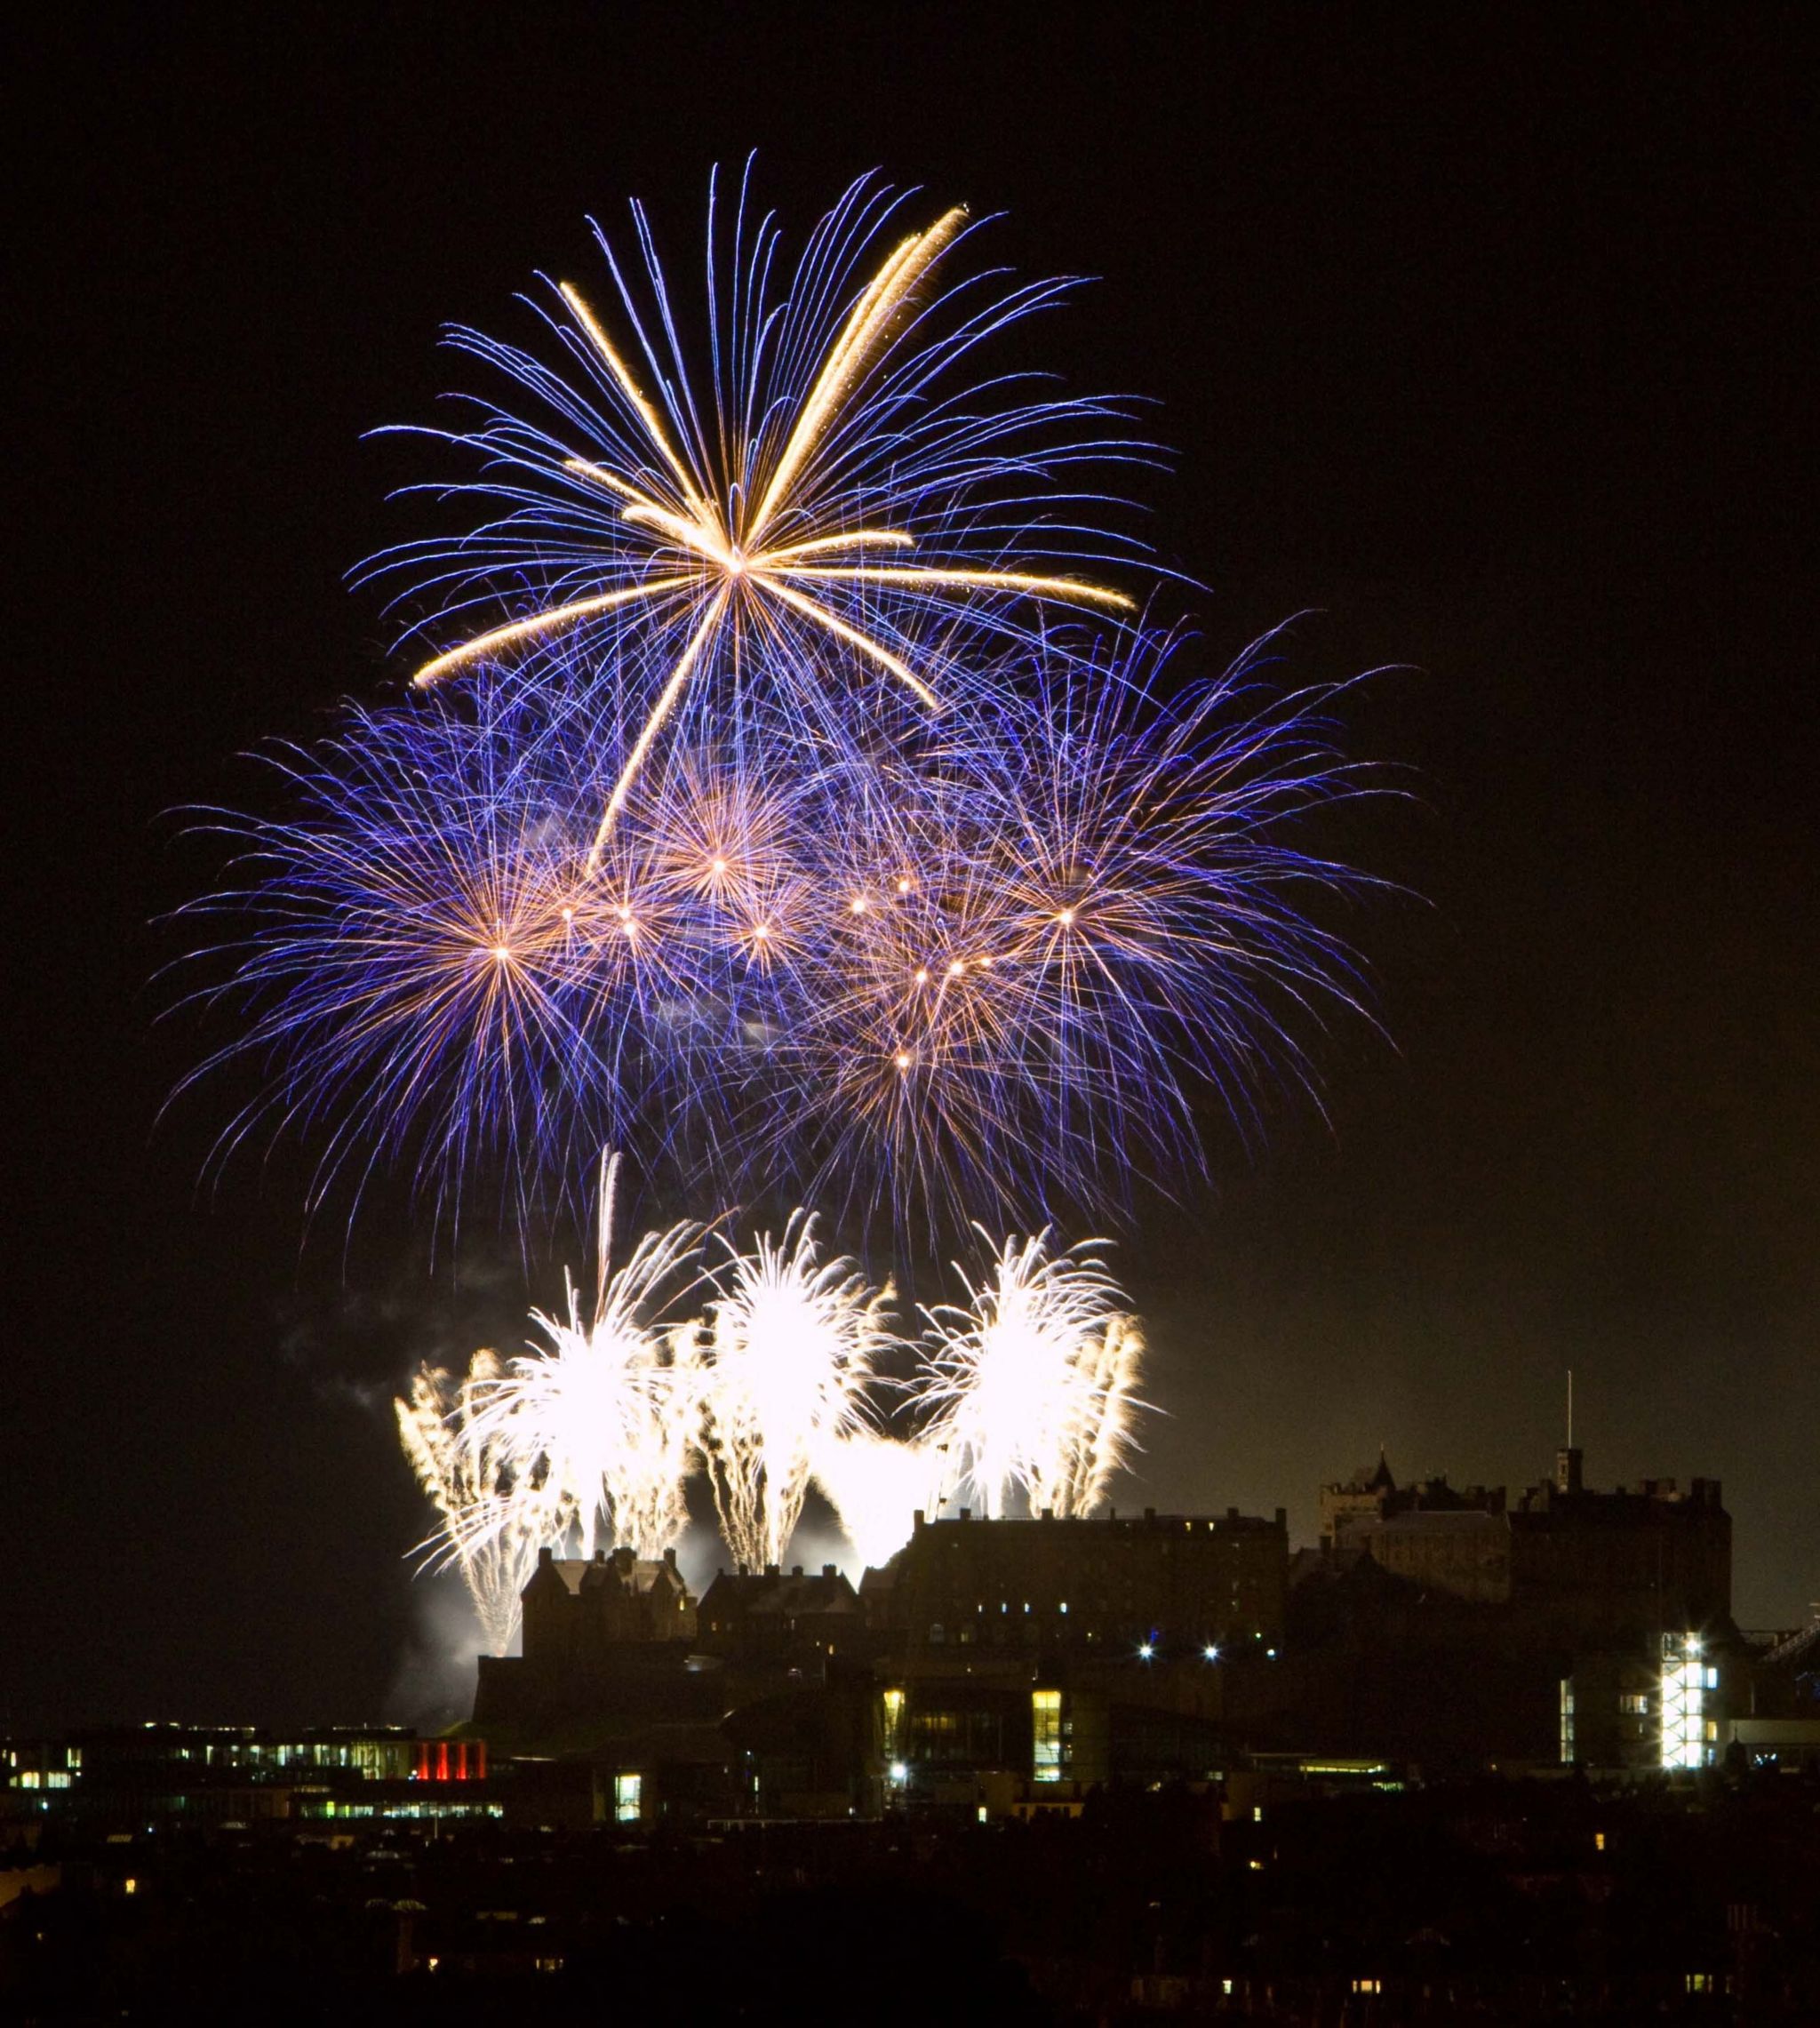 Jarlath Flynn from Edinburgh enjoyed the fireworks from the roof of his home in Kingsknowe.